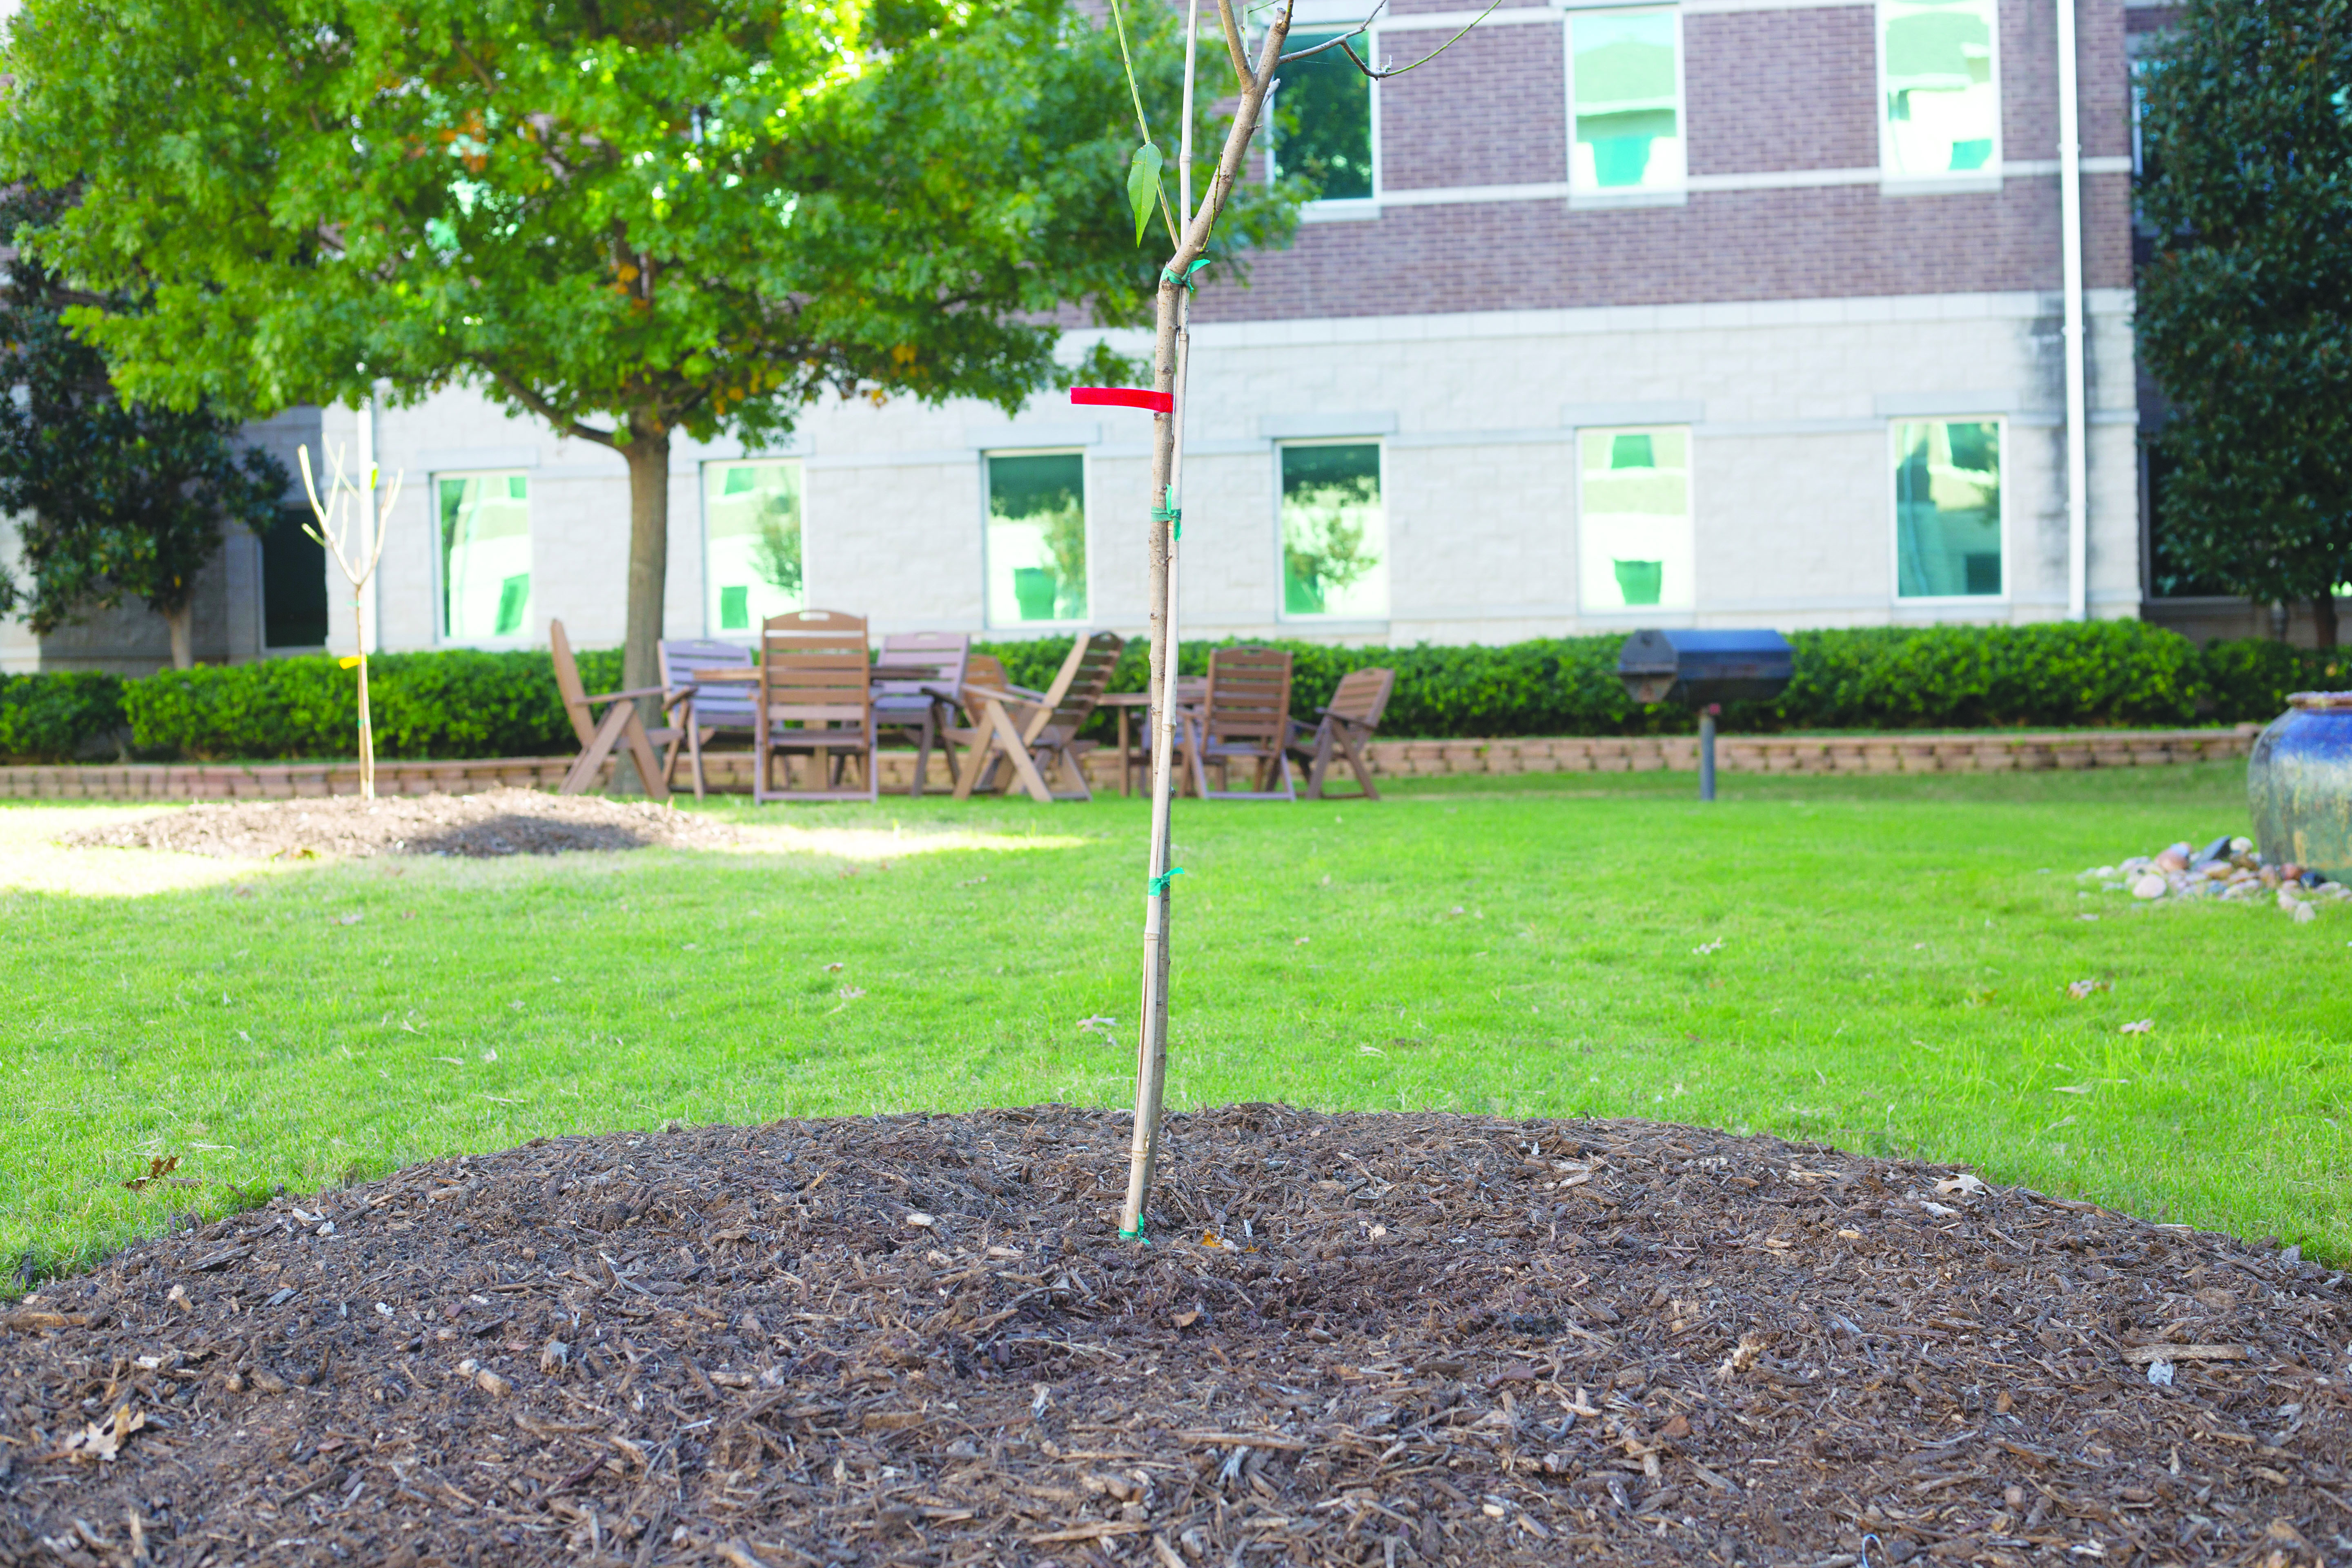 Residence hall courtyards to feature fruit trees, greenery